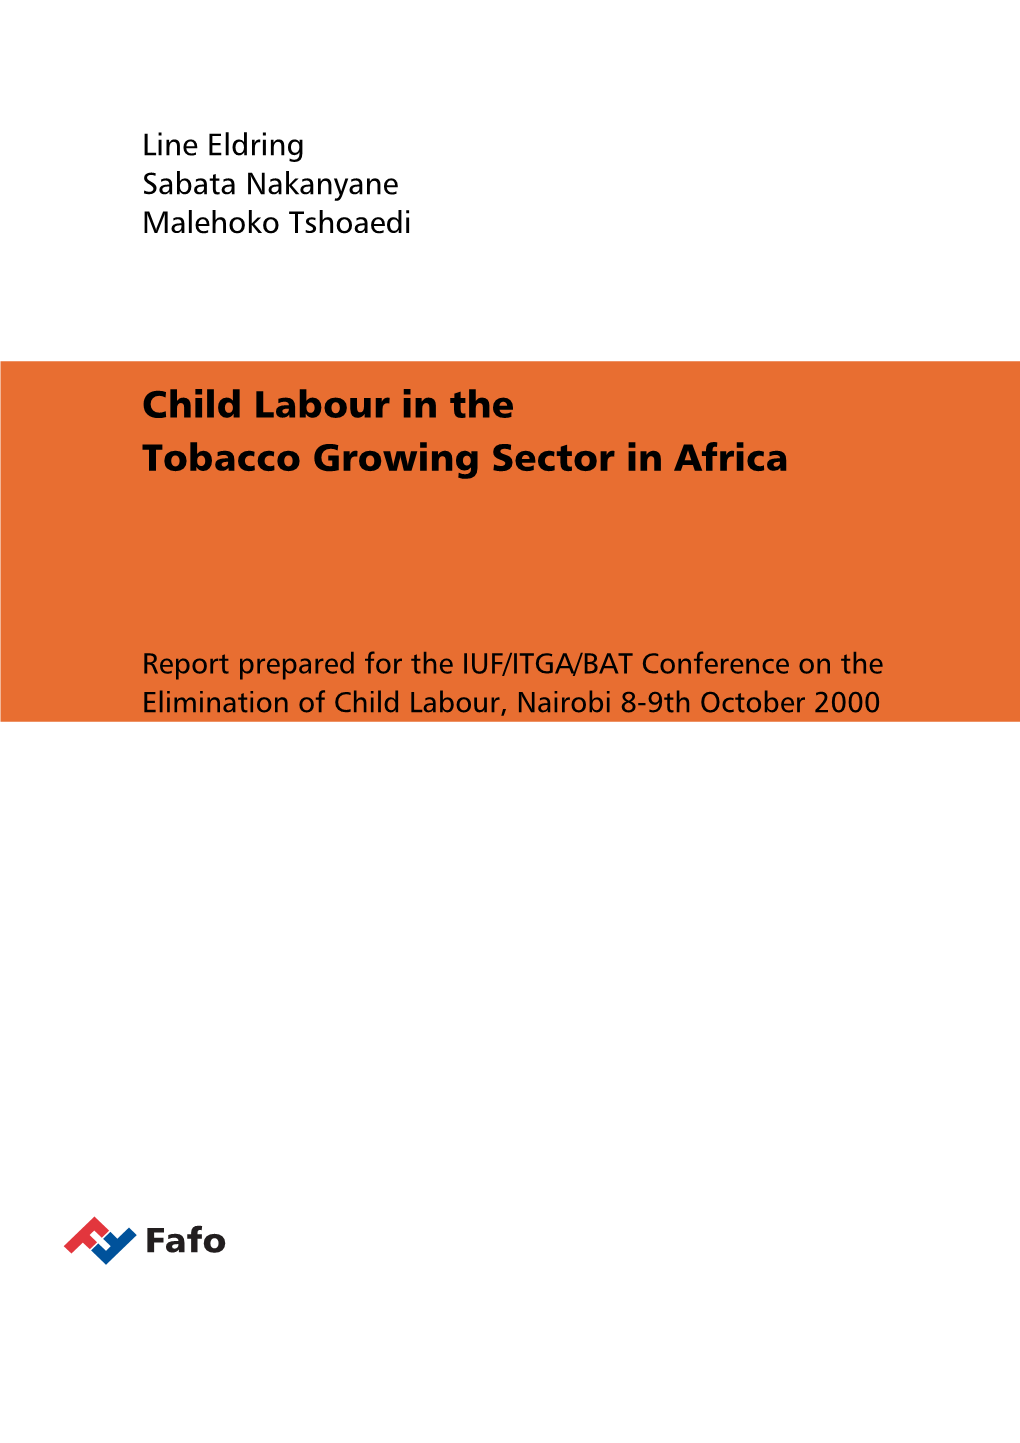 Child Labour in the Tobacco Growing Sector in Africa